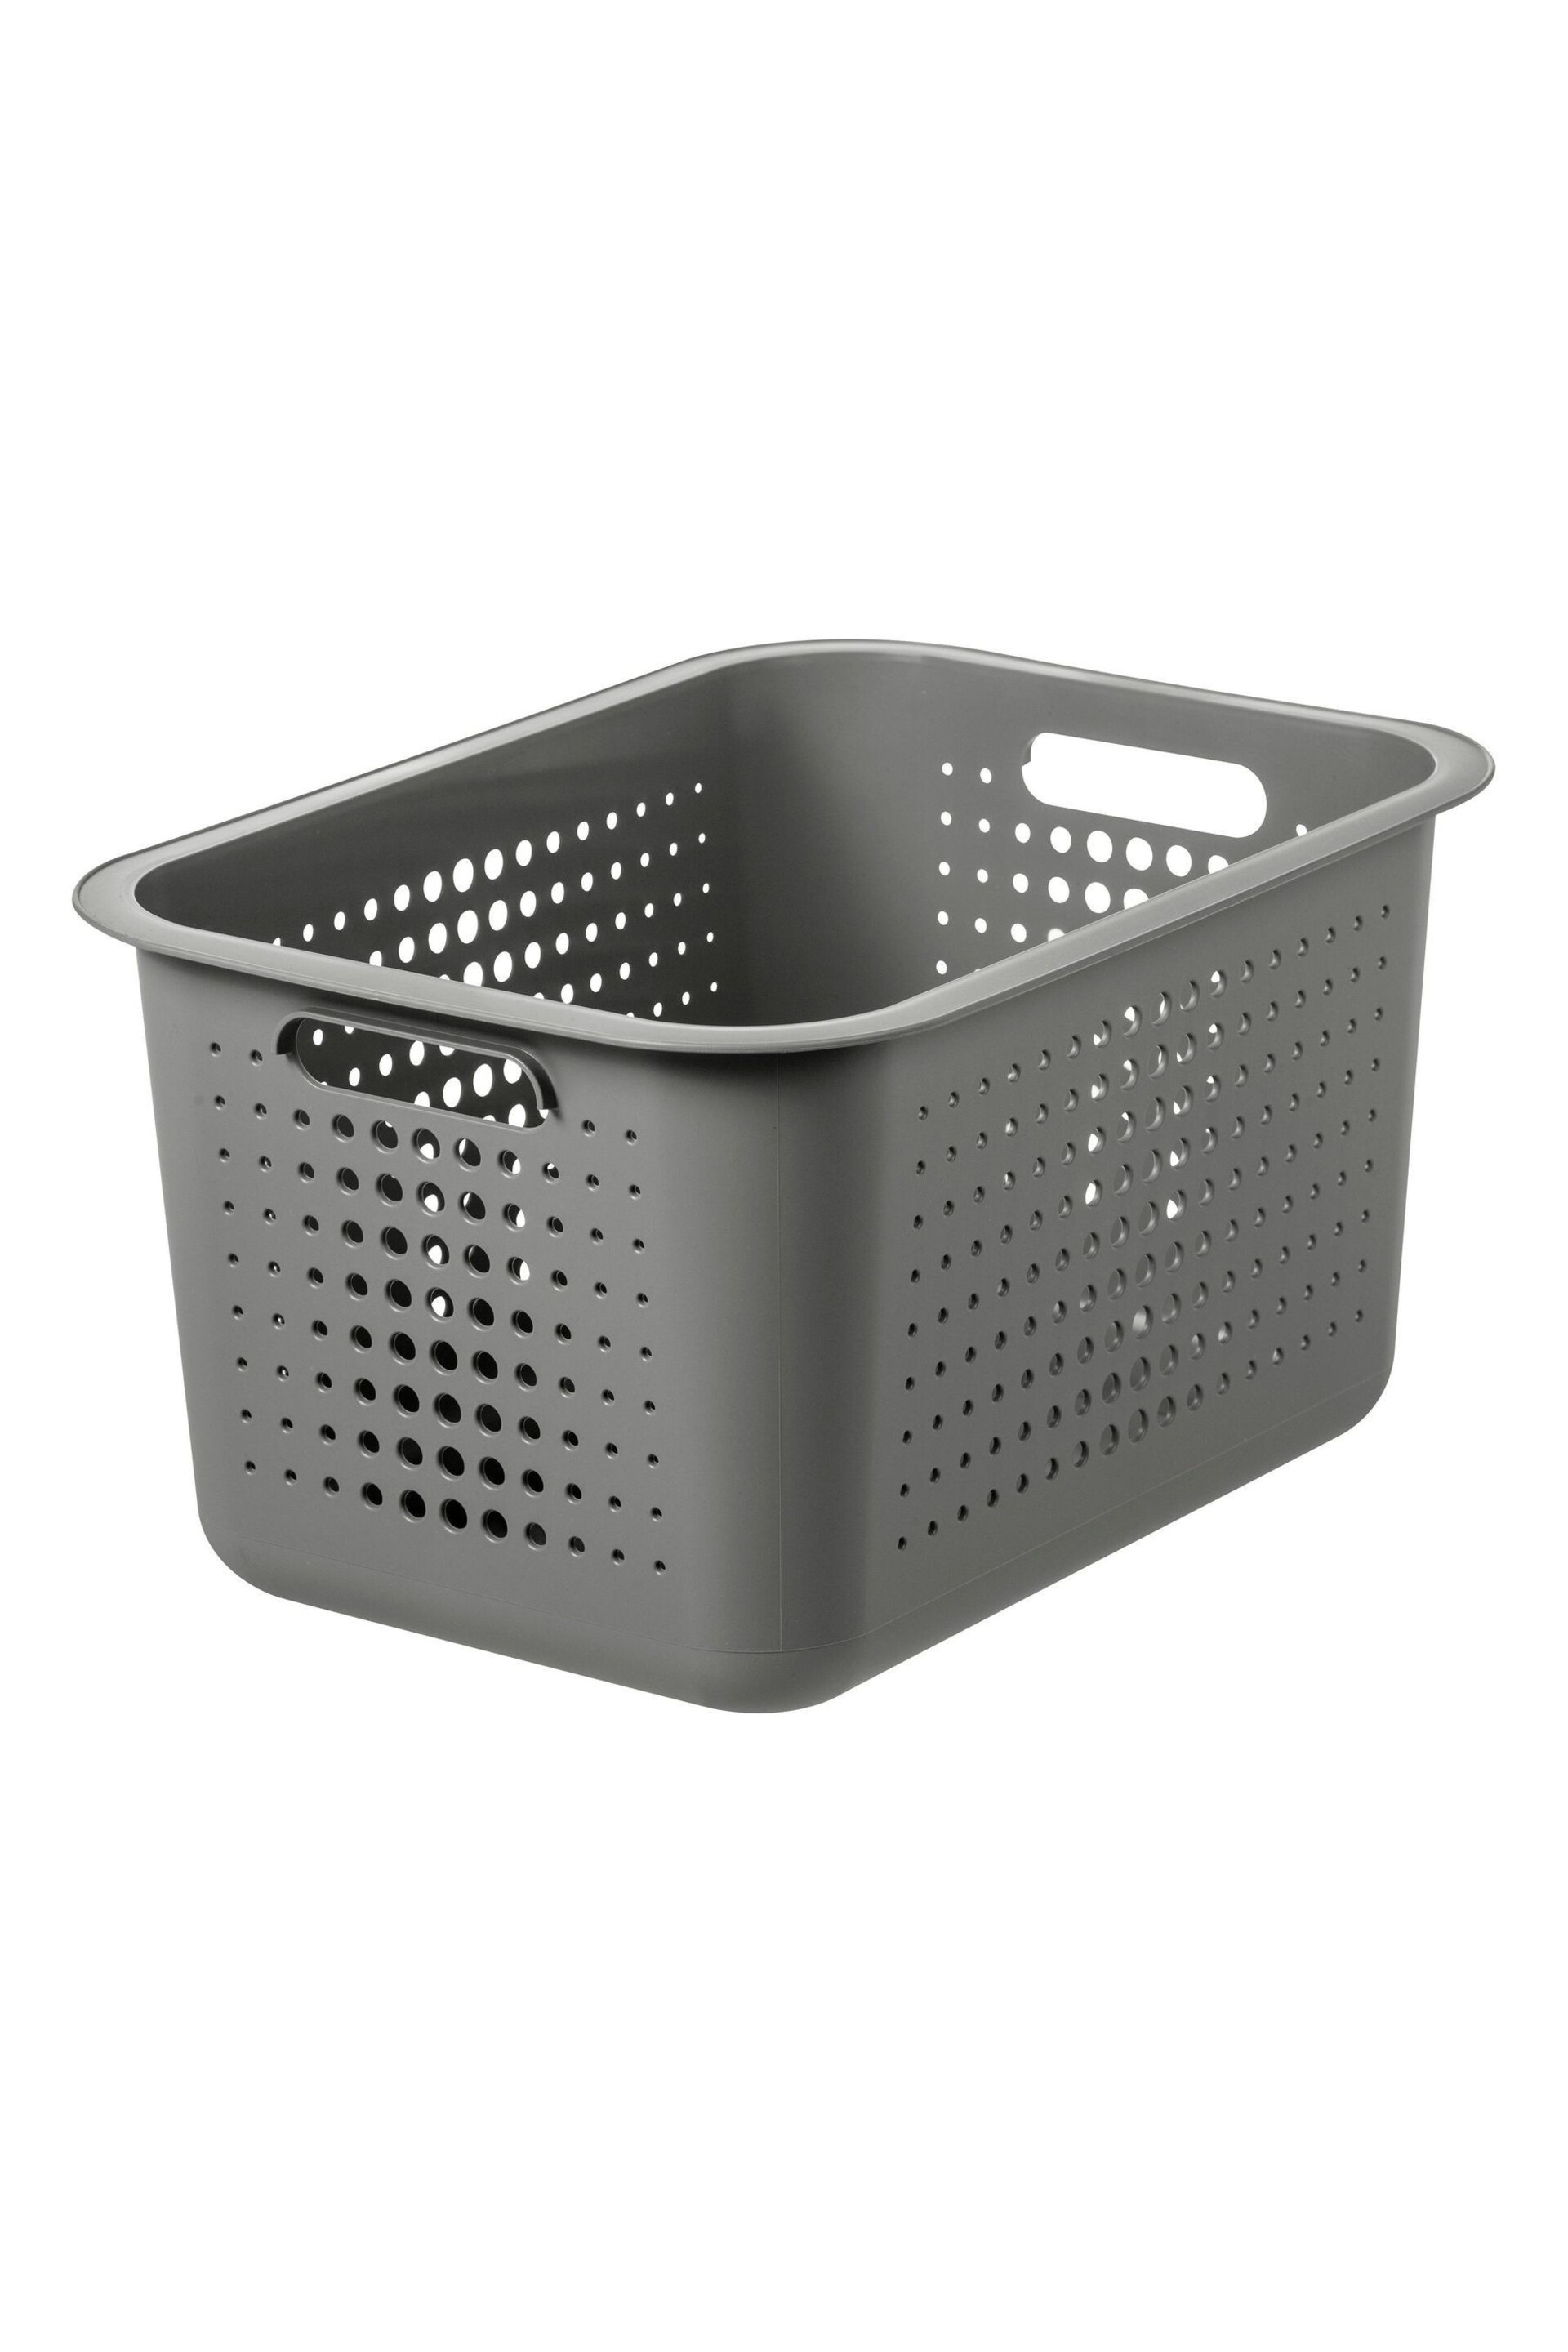 Orthex Set of 4 Grey Smartstore 13L Baskets With Lids - Image 6 of 7